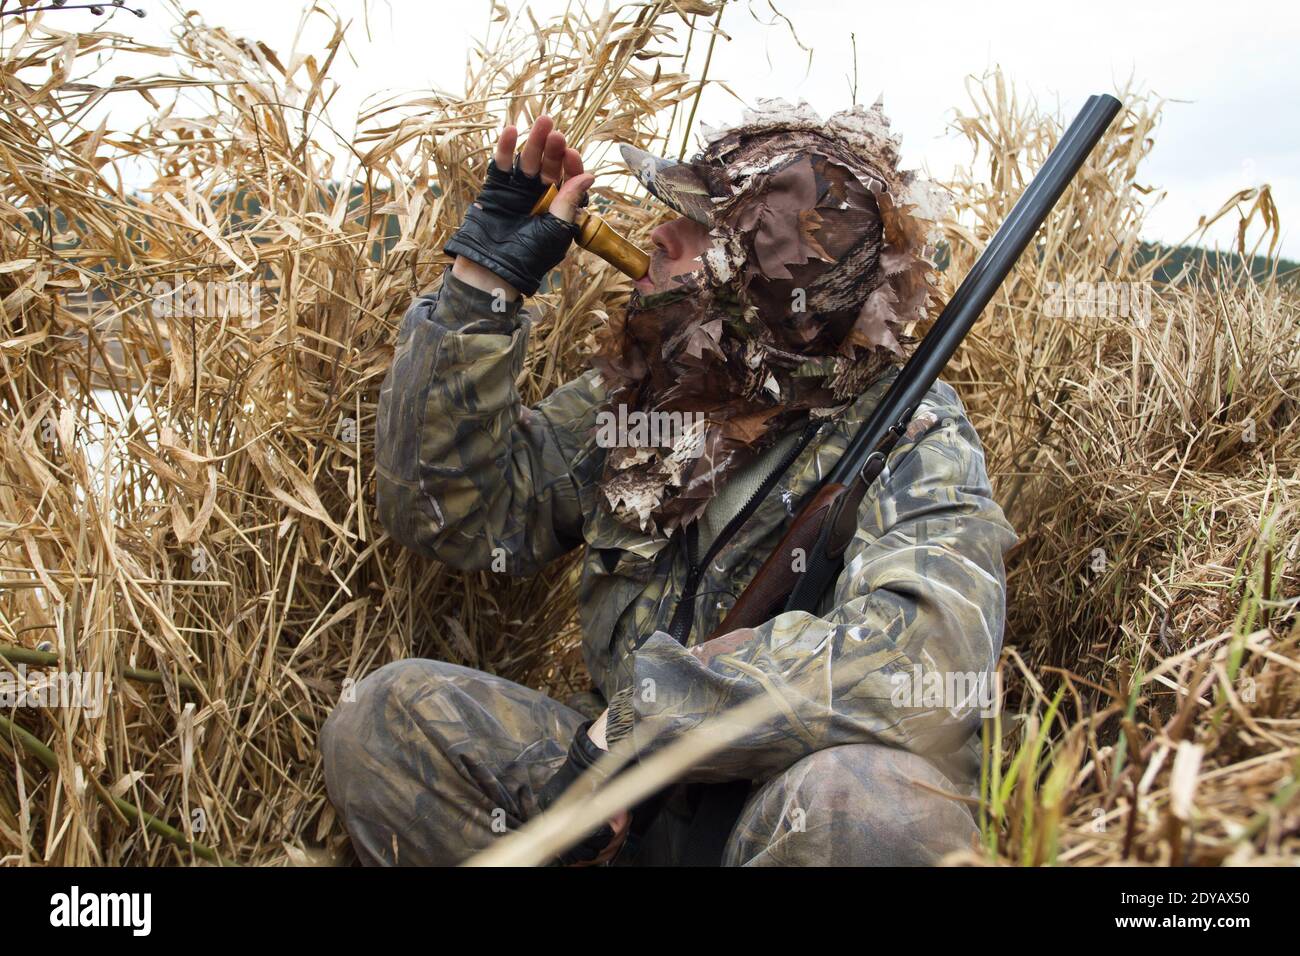 the duck hunter hid in the blind of the reeds and lures the ducks Stock Photo